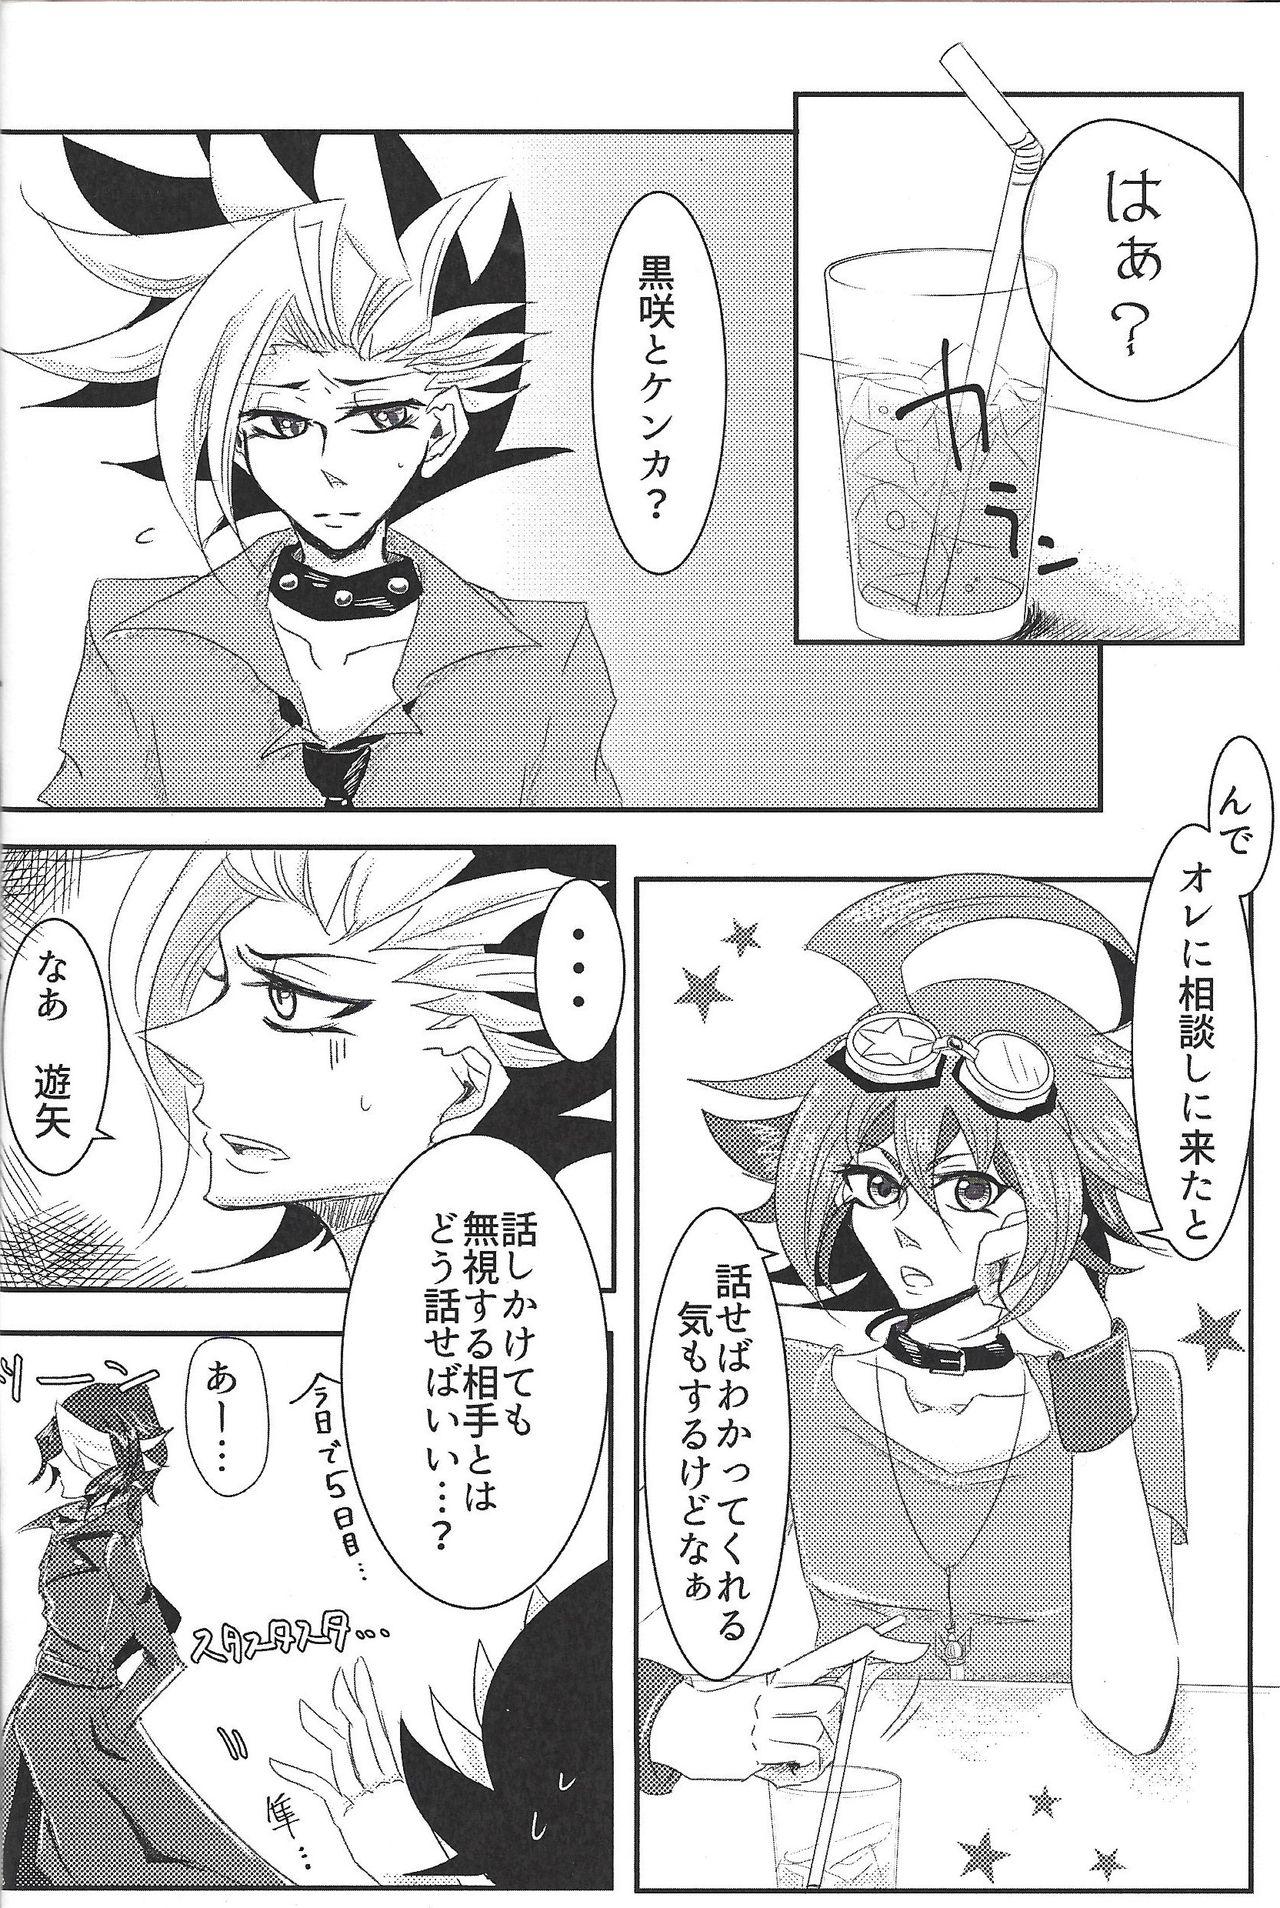 Whooty Oh Well! - Yu gi oh arc v Beautiful - Page 3